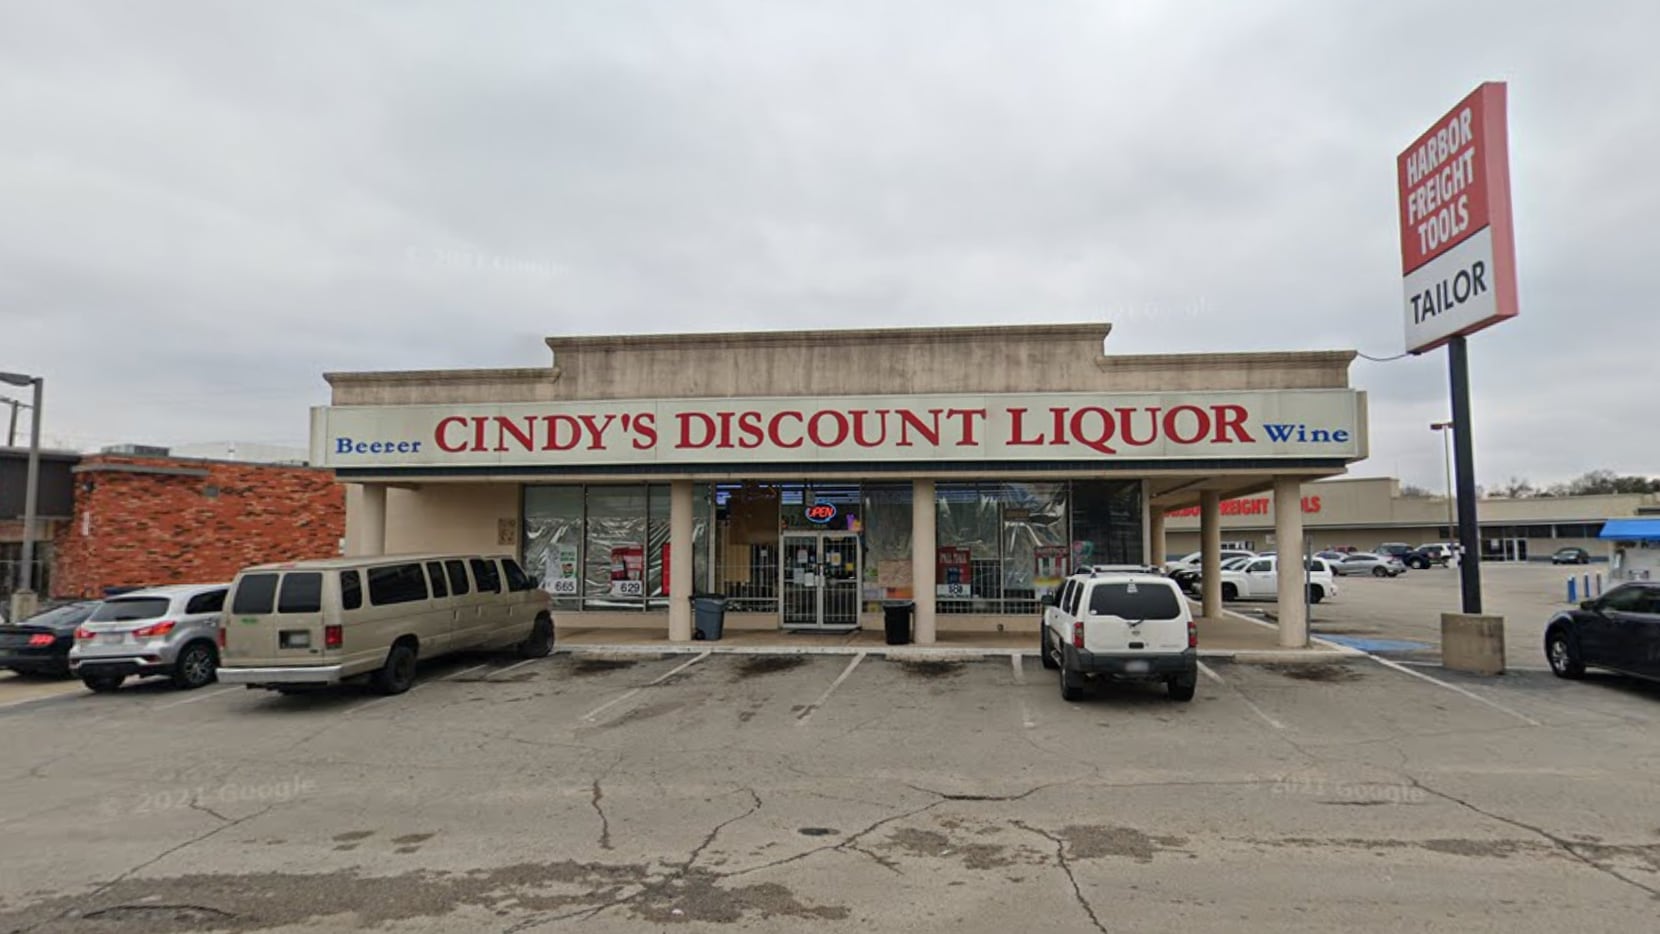 Dallas police were called to Cindy’s Discount Liquor in the 6500 block of Skillman Street...